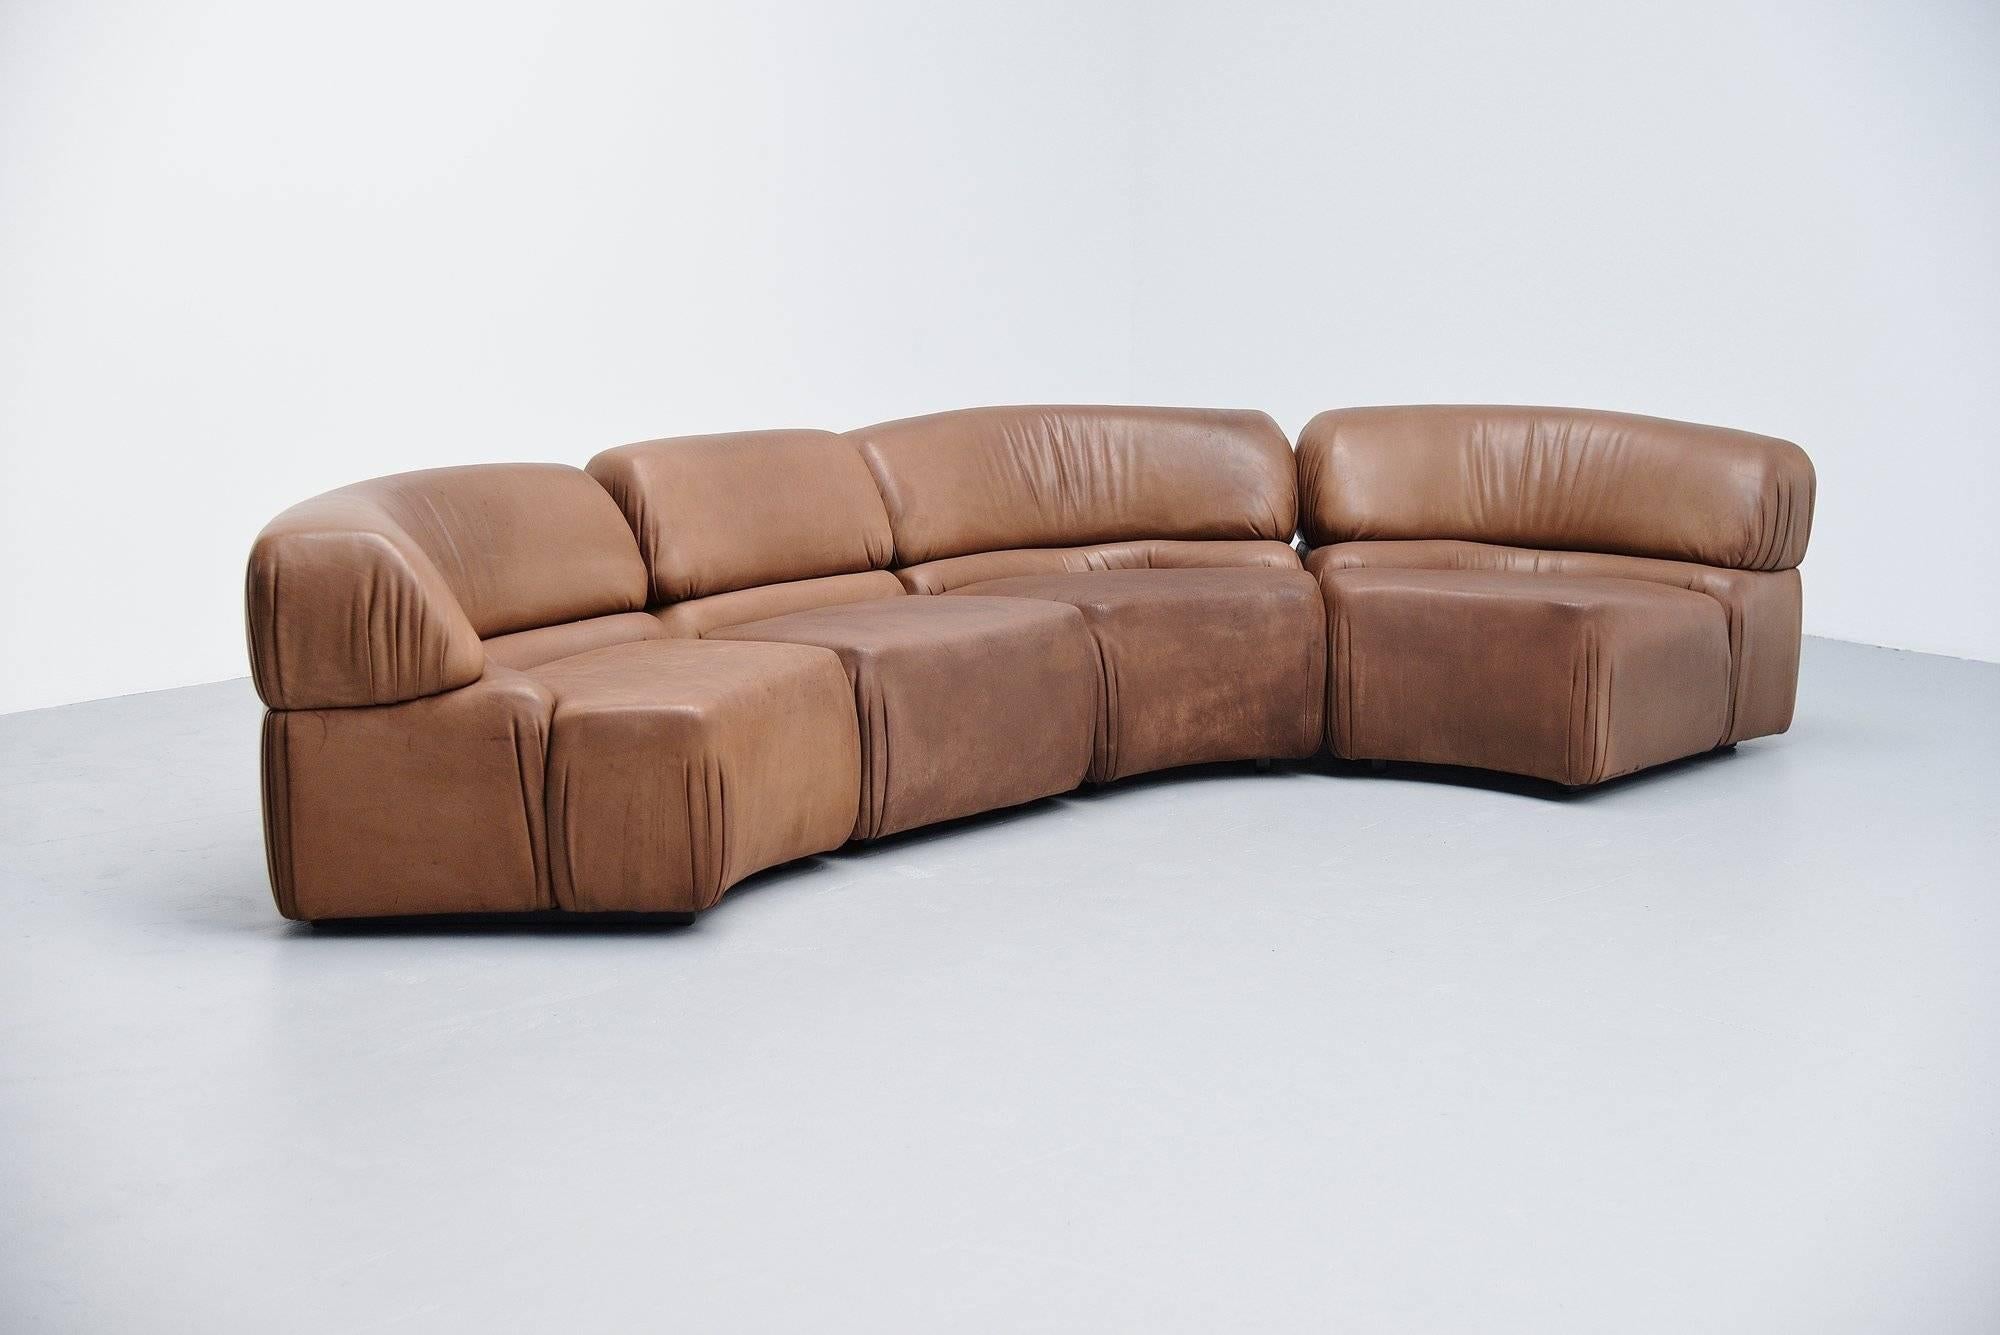 Comfortable so called 'Cosmos' elemented sofa designed and manufactured by De Sede, Switzerland, 1970. This sofa has a wooden structure stuffed with foam and covered with buffalo leather. The sofa is in light brown and is in good original condition